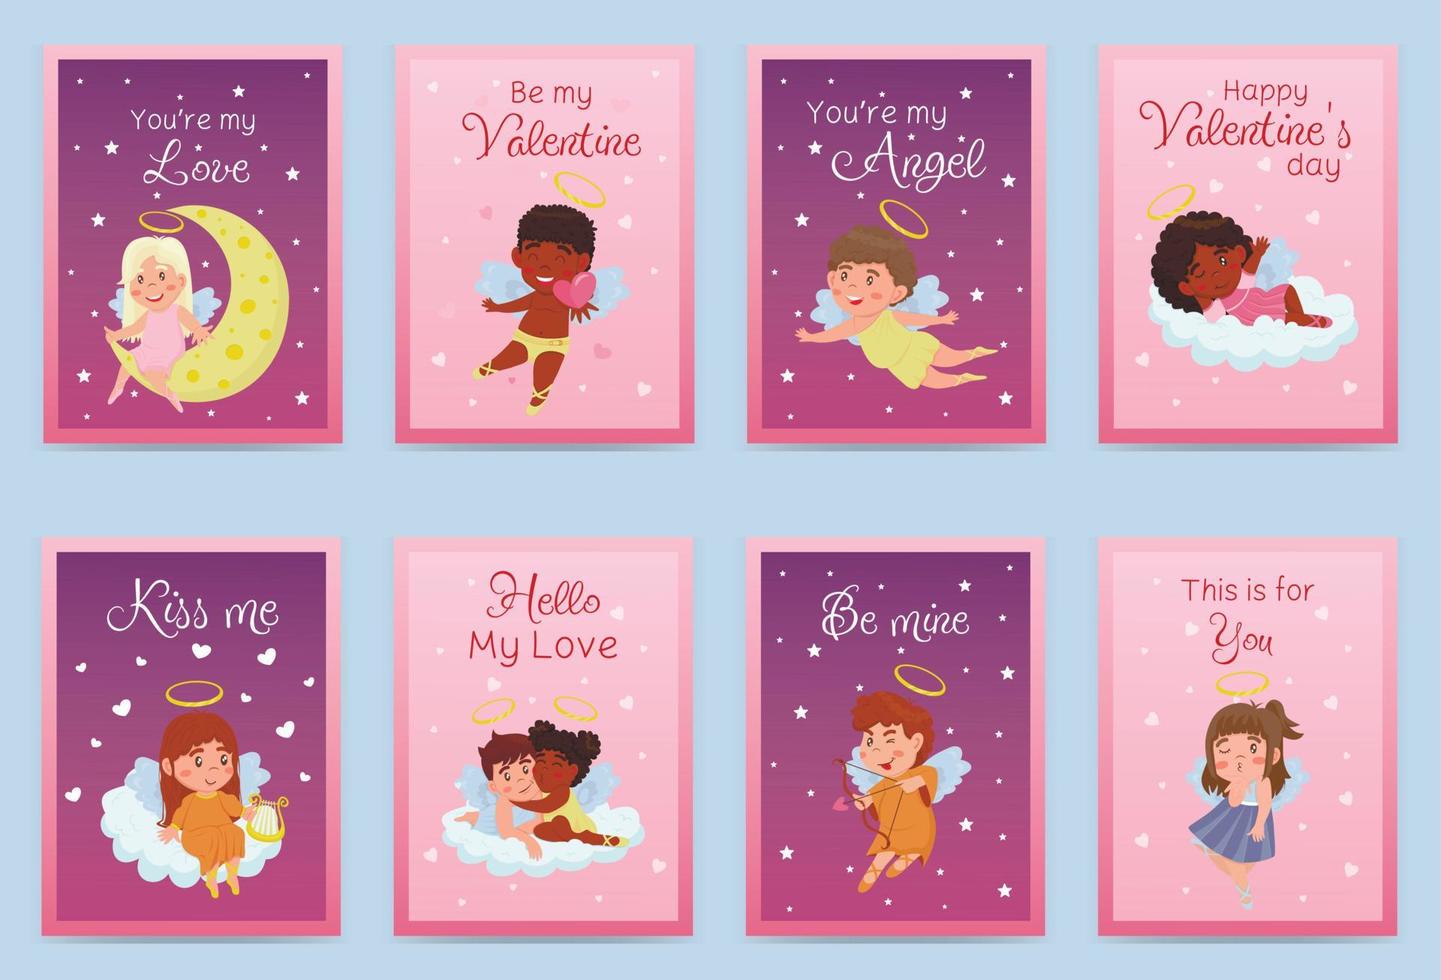 Collection of valentine's day greeting cards with children angels. Relationship, love, Valentine's day, romantic concept. Vector illustration for banner, poster, postcard, postcard.